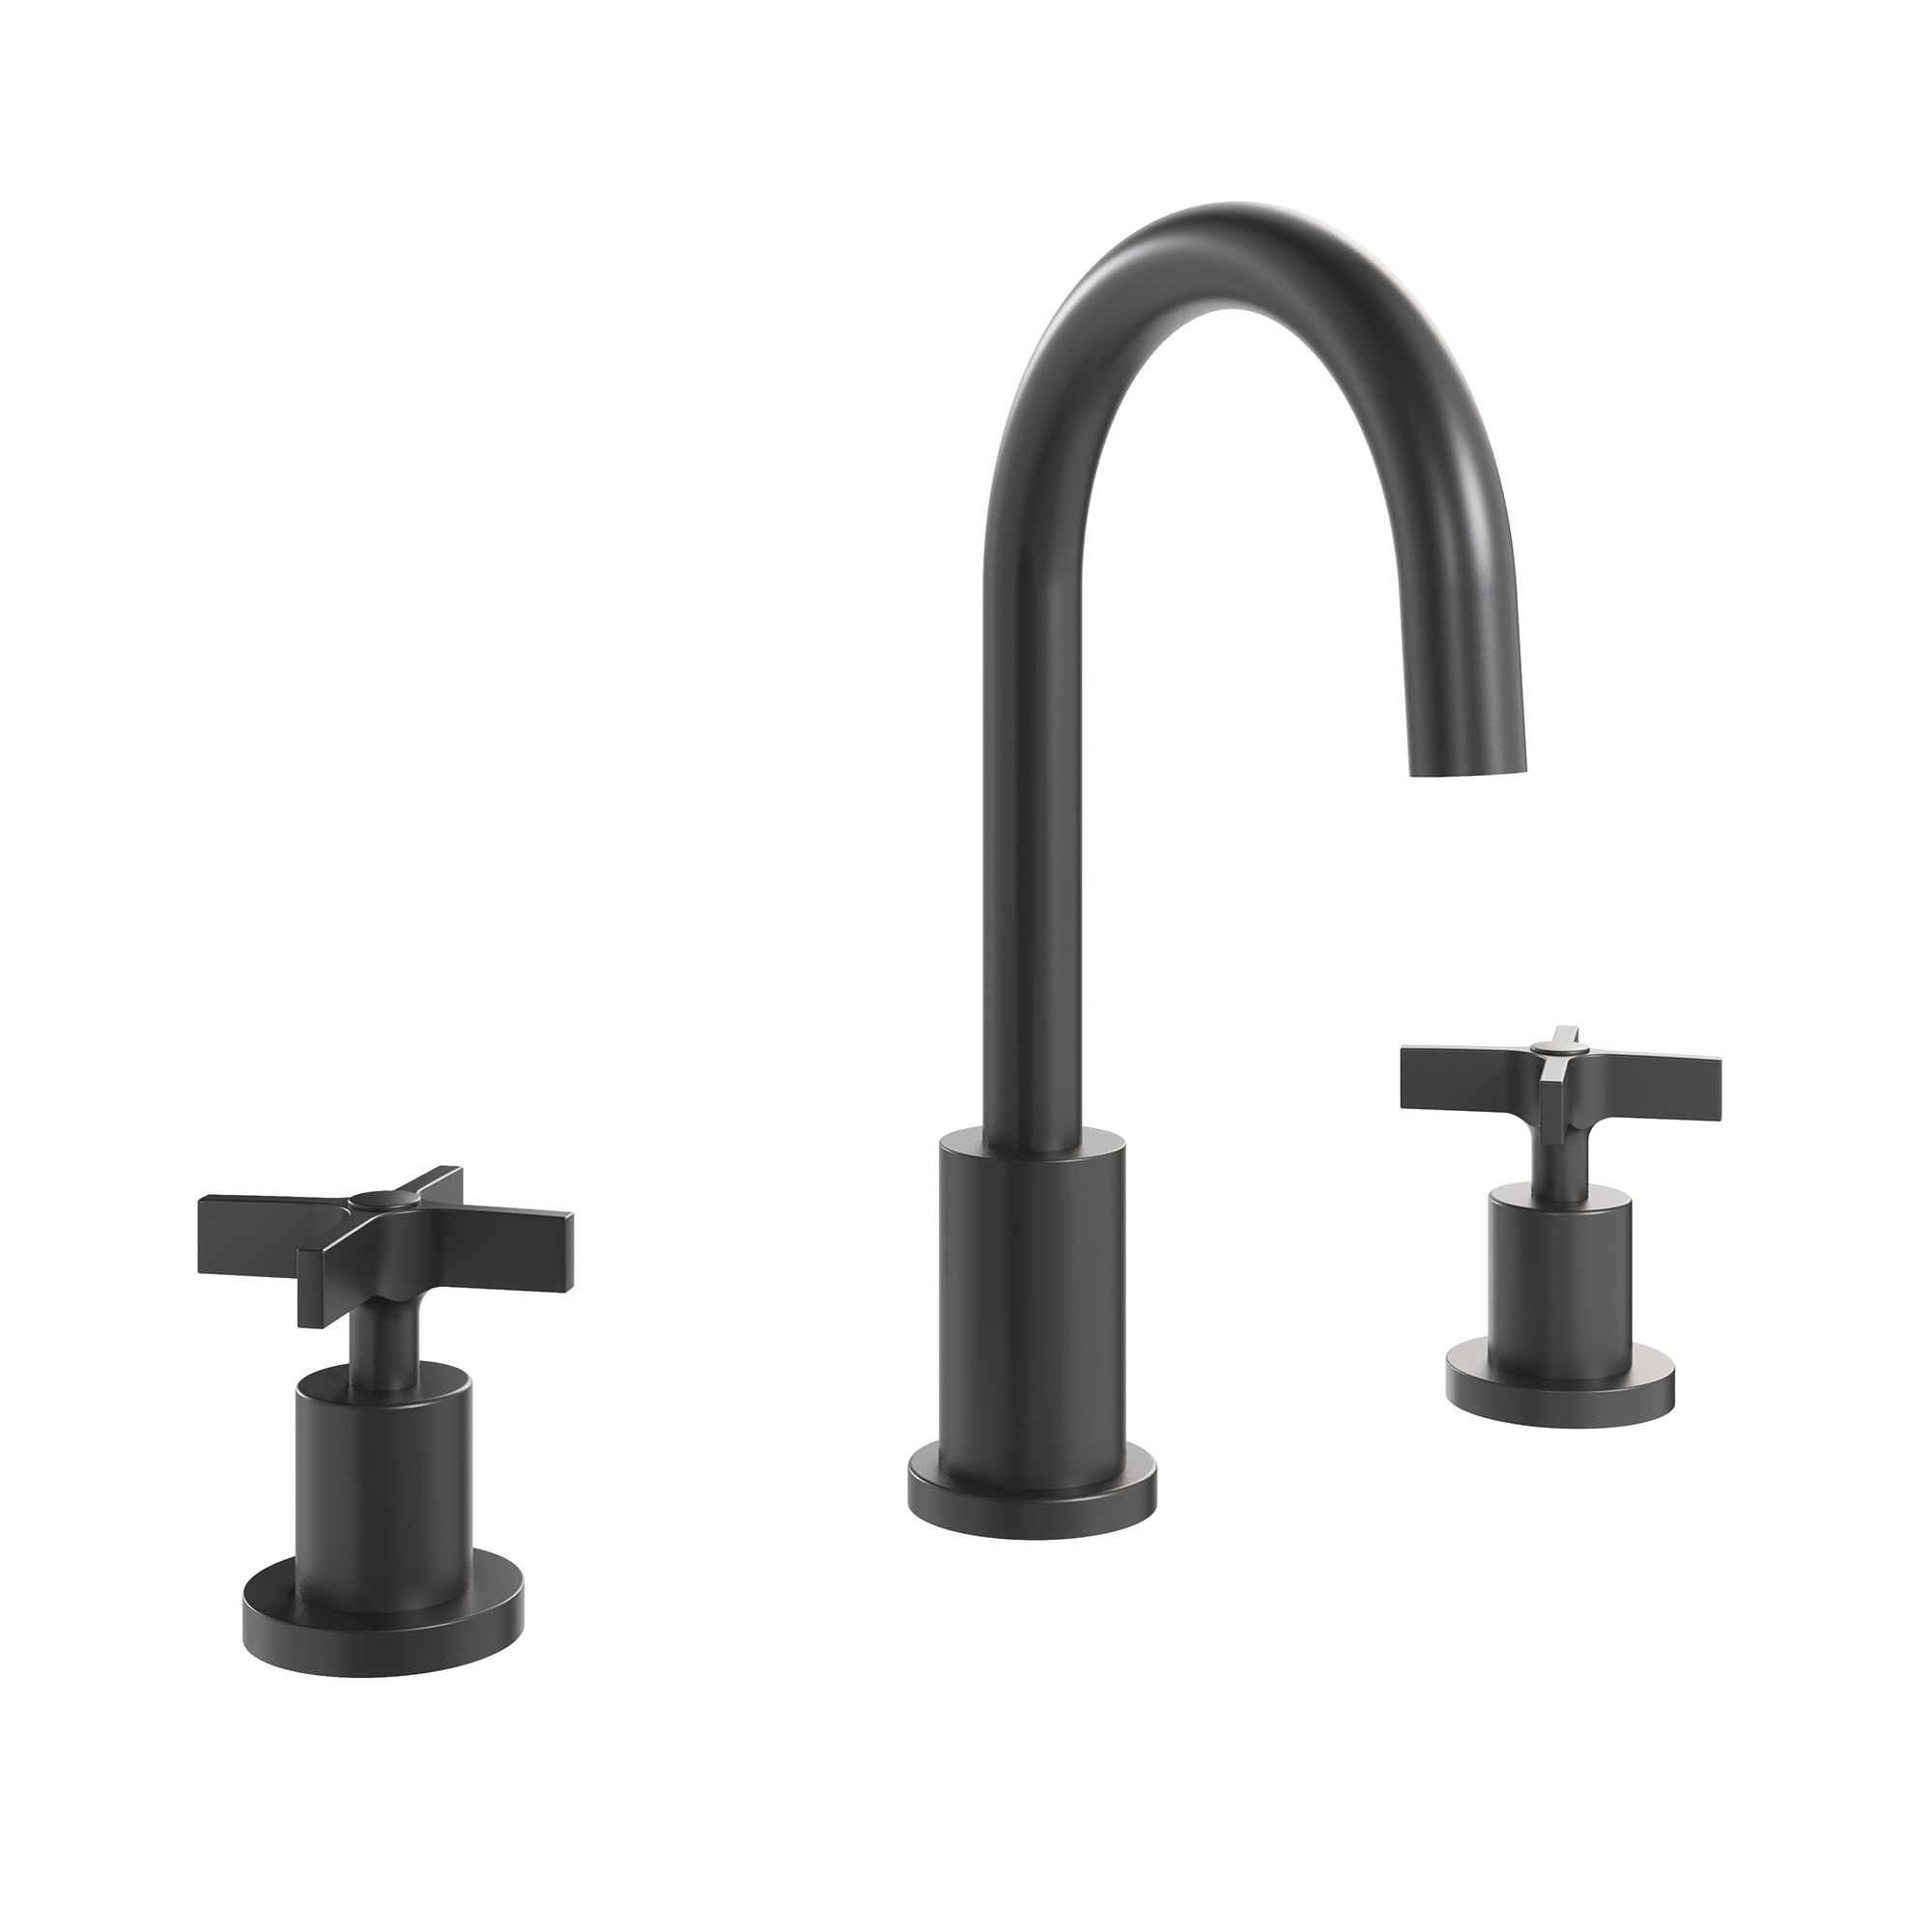 The Clover Basin 3H Deck Mounted Tap Set